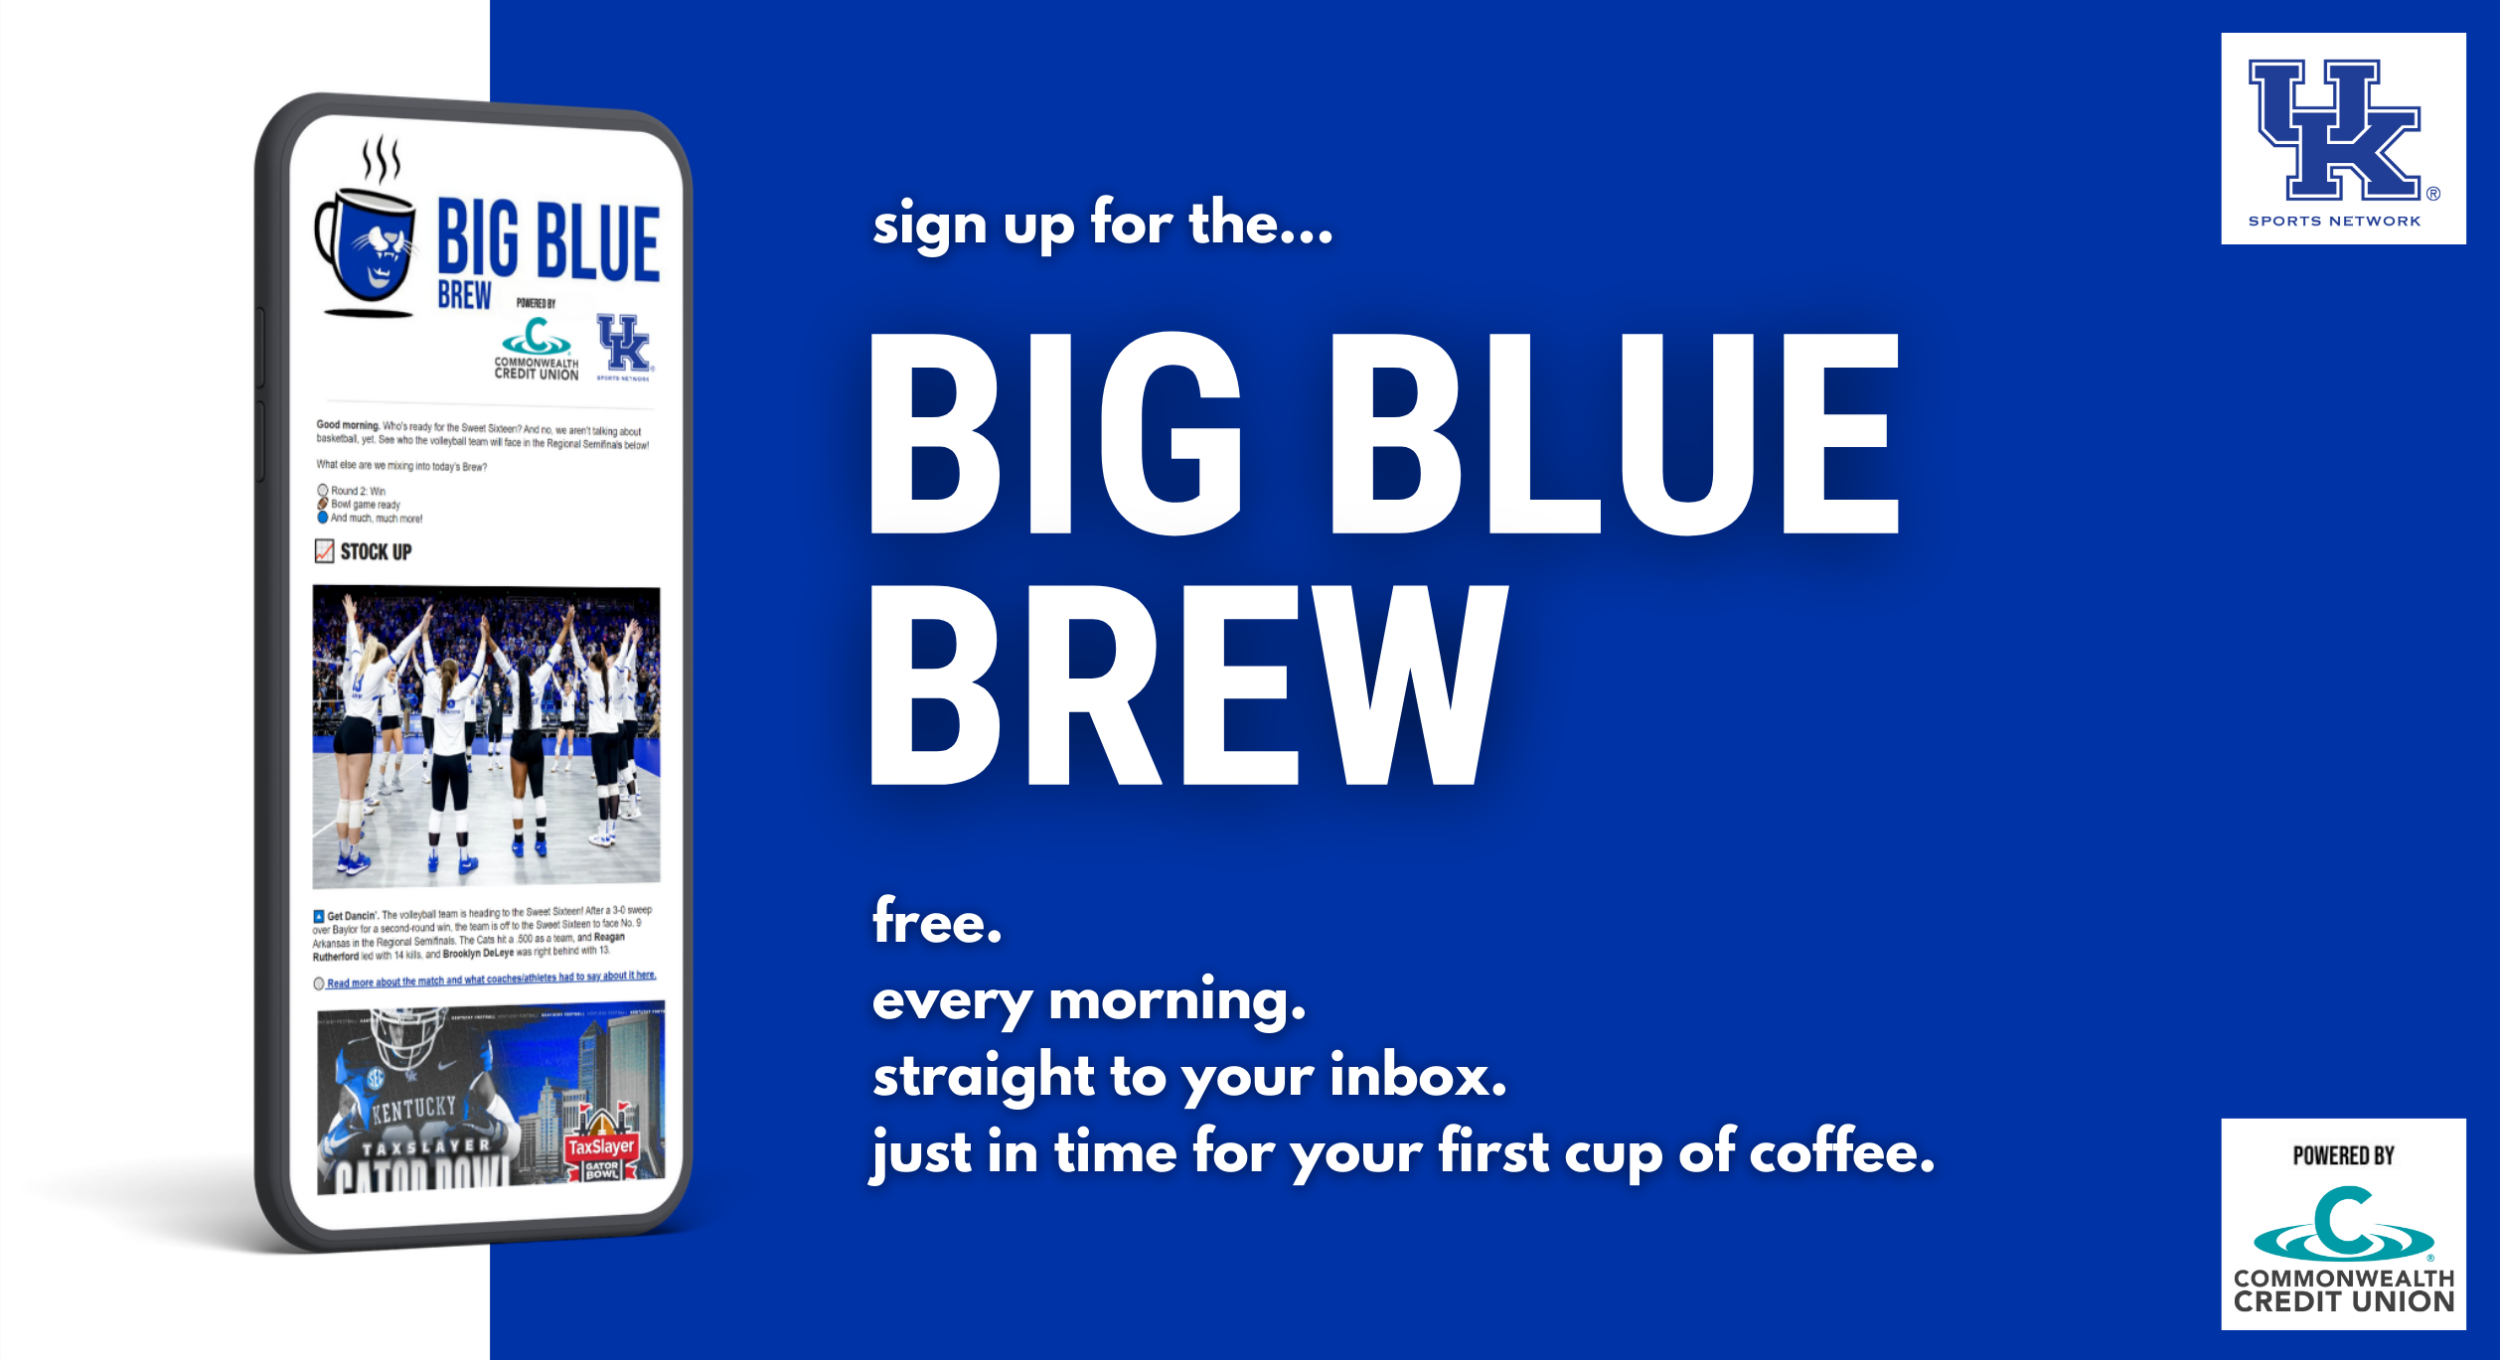 UK Sports Network Launches “Big Blue Brew” Presented by Commonwealth Credit Union